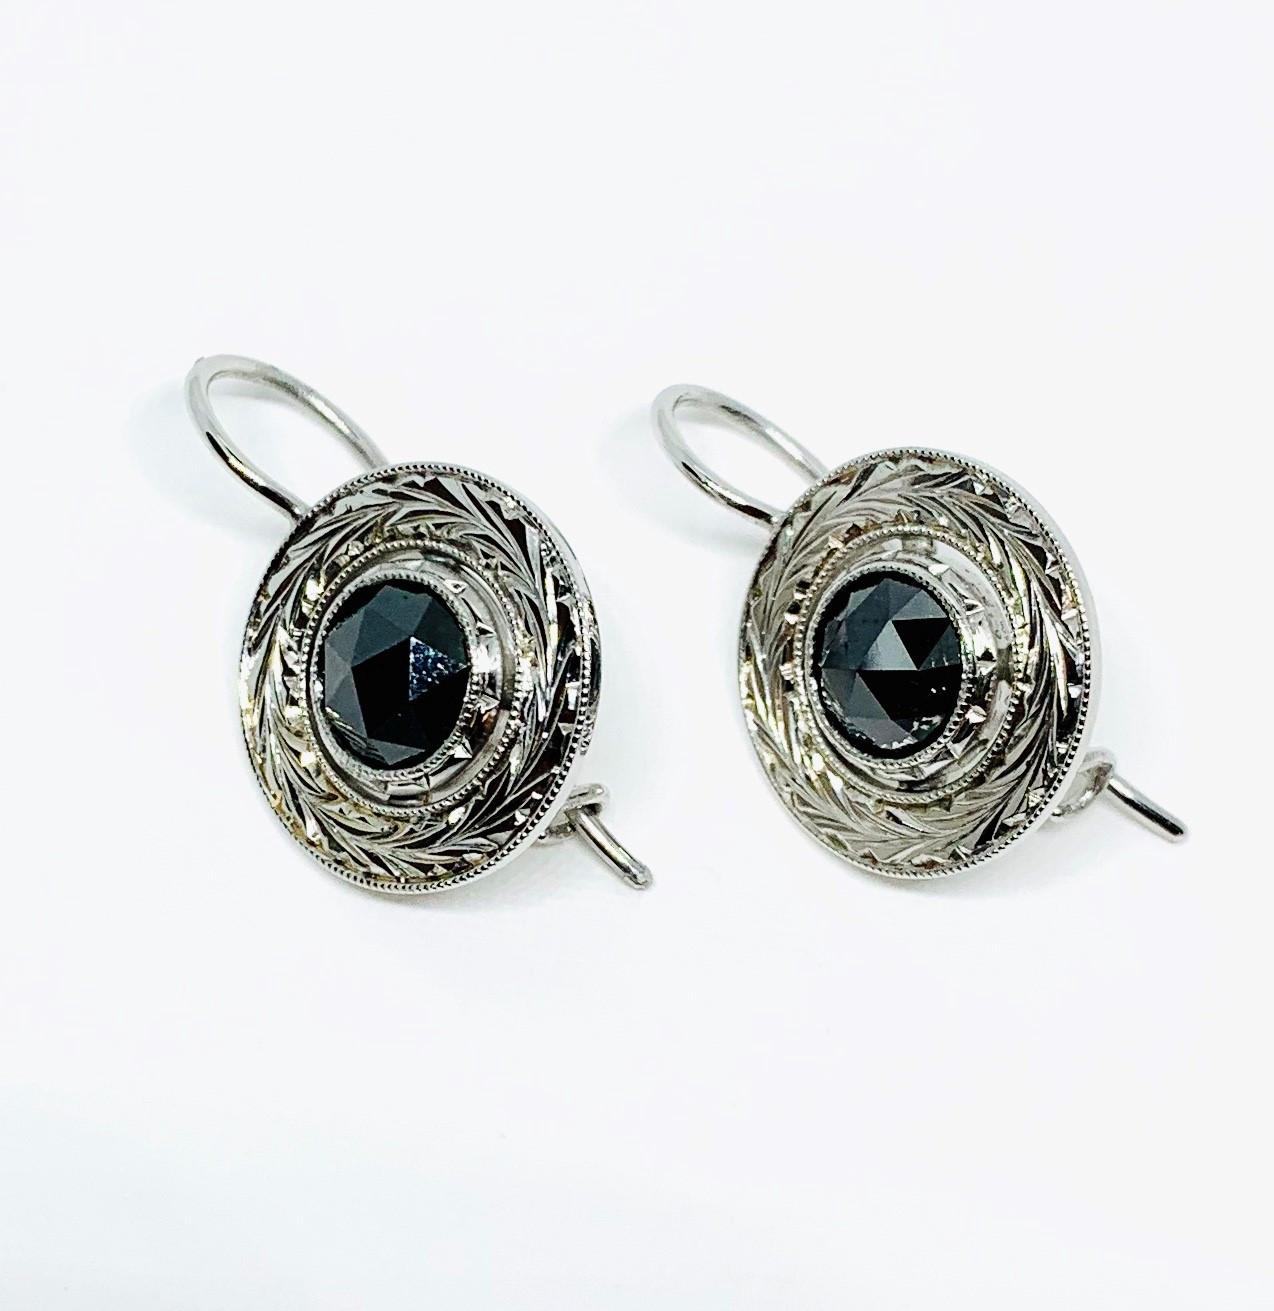 Rose Cut Black Diamond Engraved Drop Earrings in White Gold, 2.42 Carats Total In New Condition For Sale In Los Angeles, CA